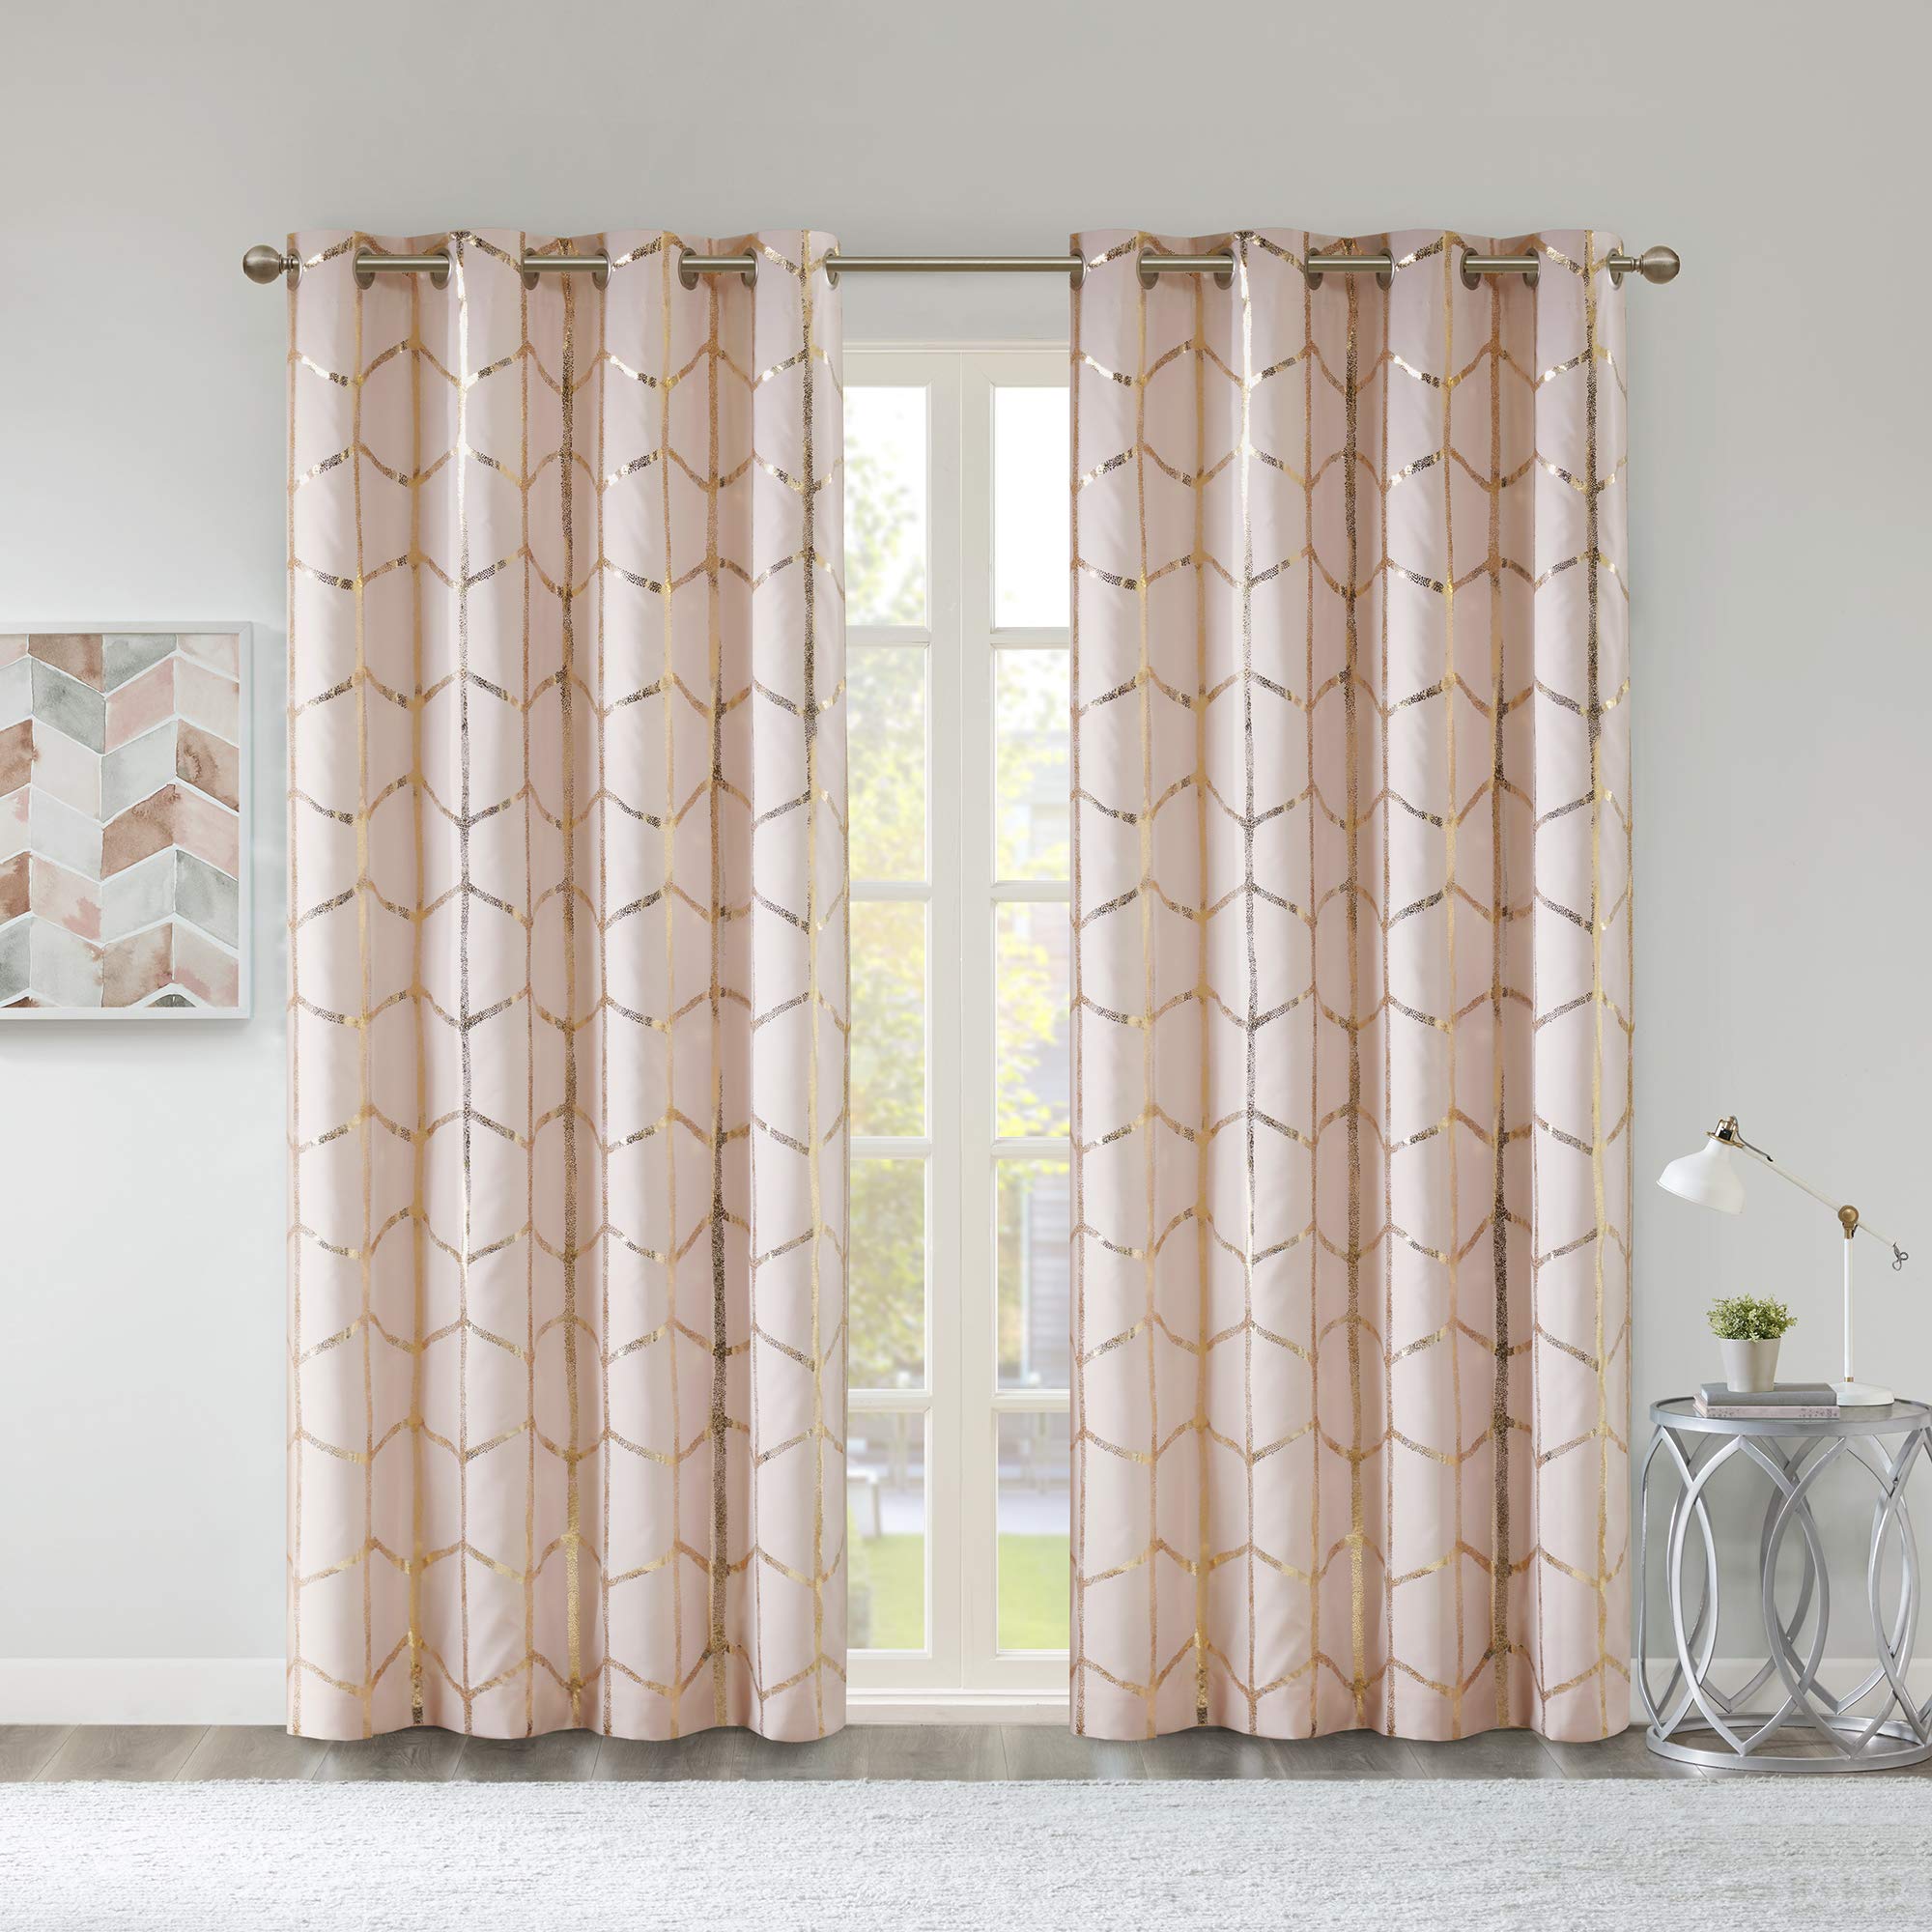 Book Cover Intelligent Design Raina Total Blackout Metallic Print Grommet Top Single Curtain Panel Thermal Insulated Light Blocking Drape for Bedroom Living Room and Dorm, 50x84, Blush/Gold 1 Piece Blush/Gold 50